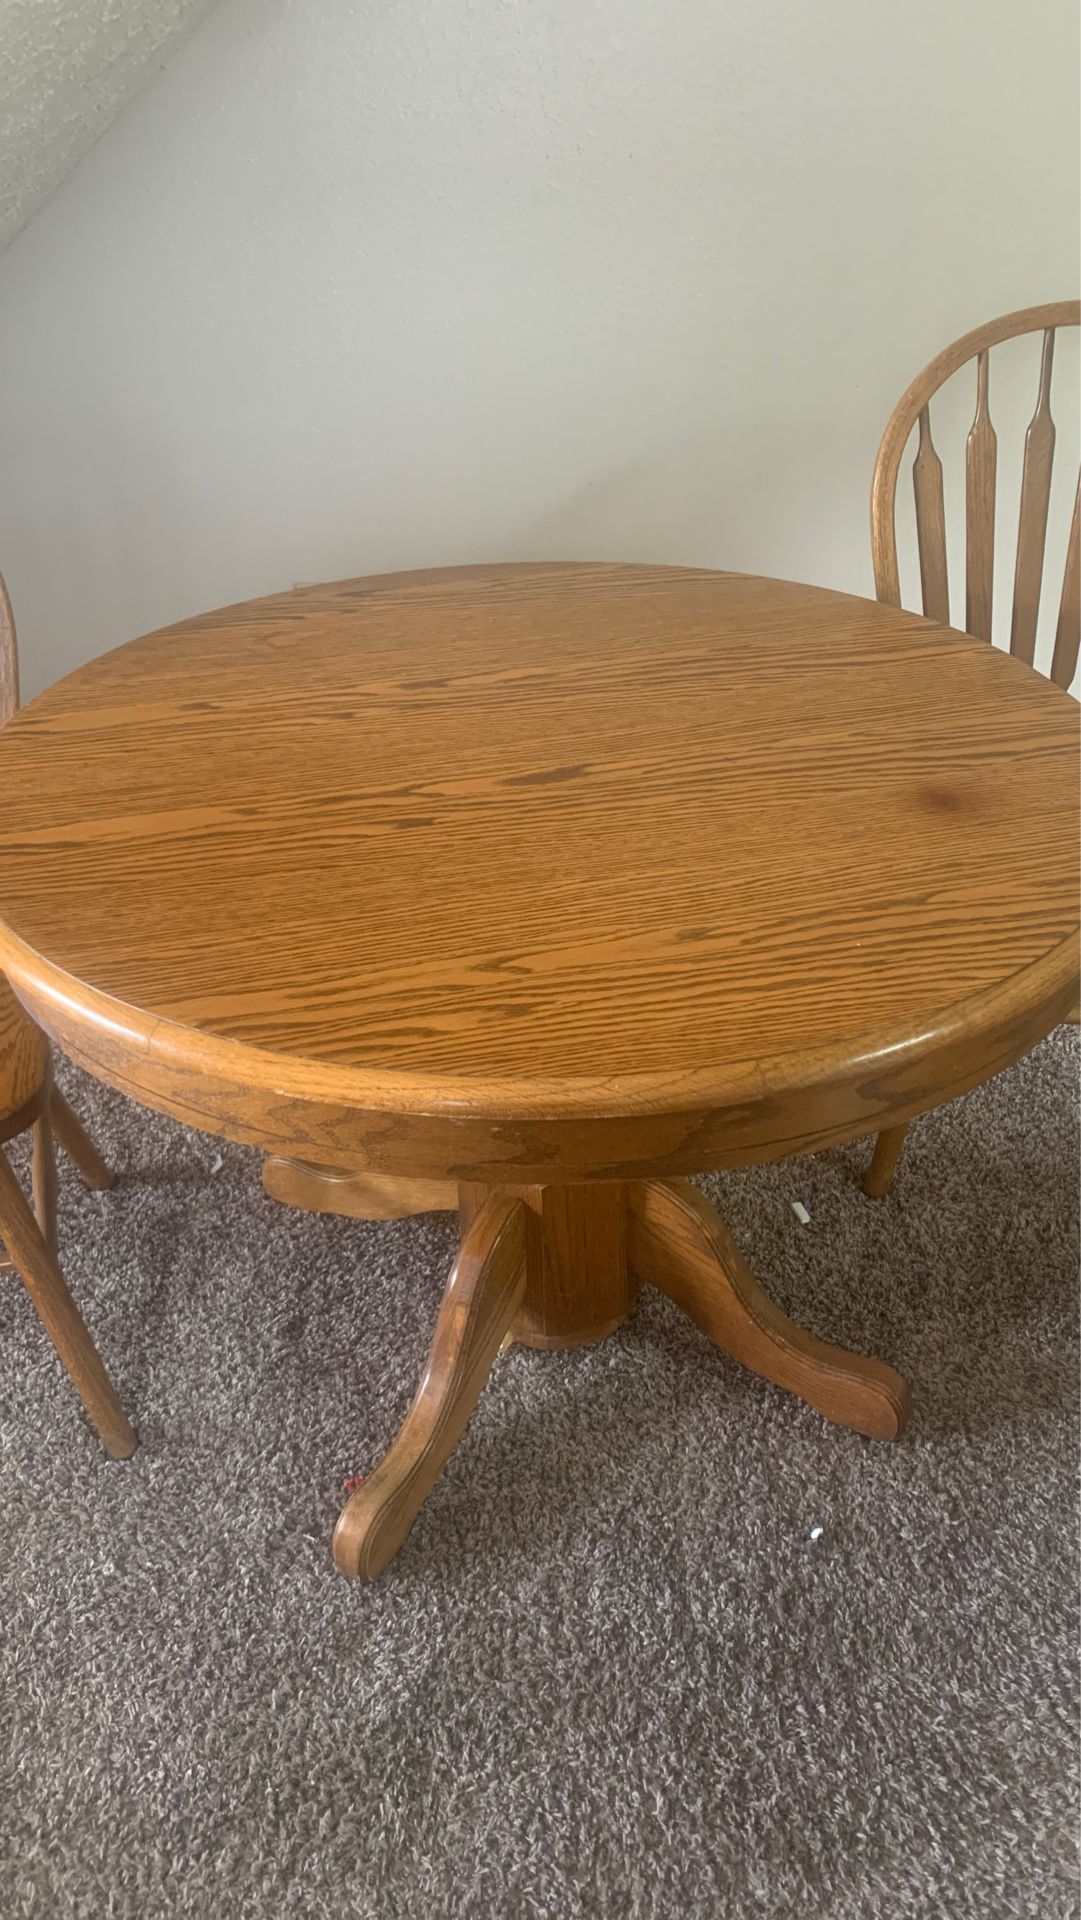 Authentic Wood table! $20! Very sturdy kitchen table. Must be able to pick up.